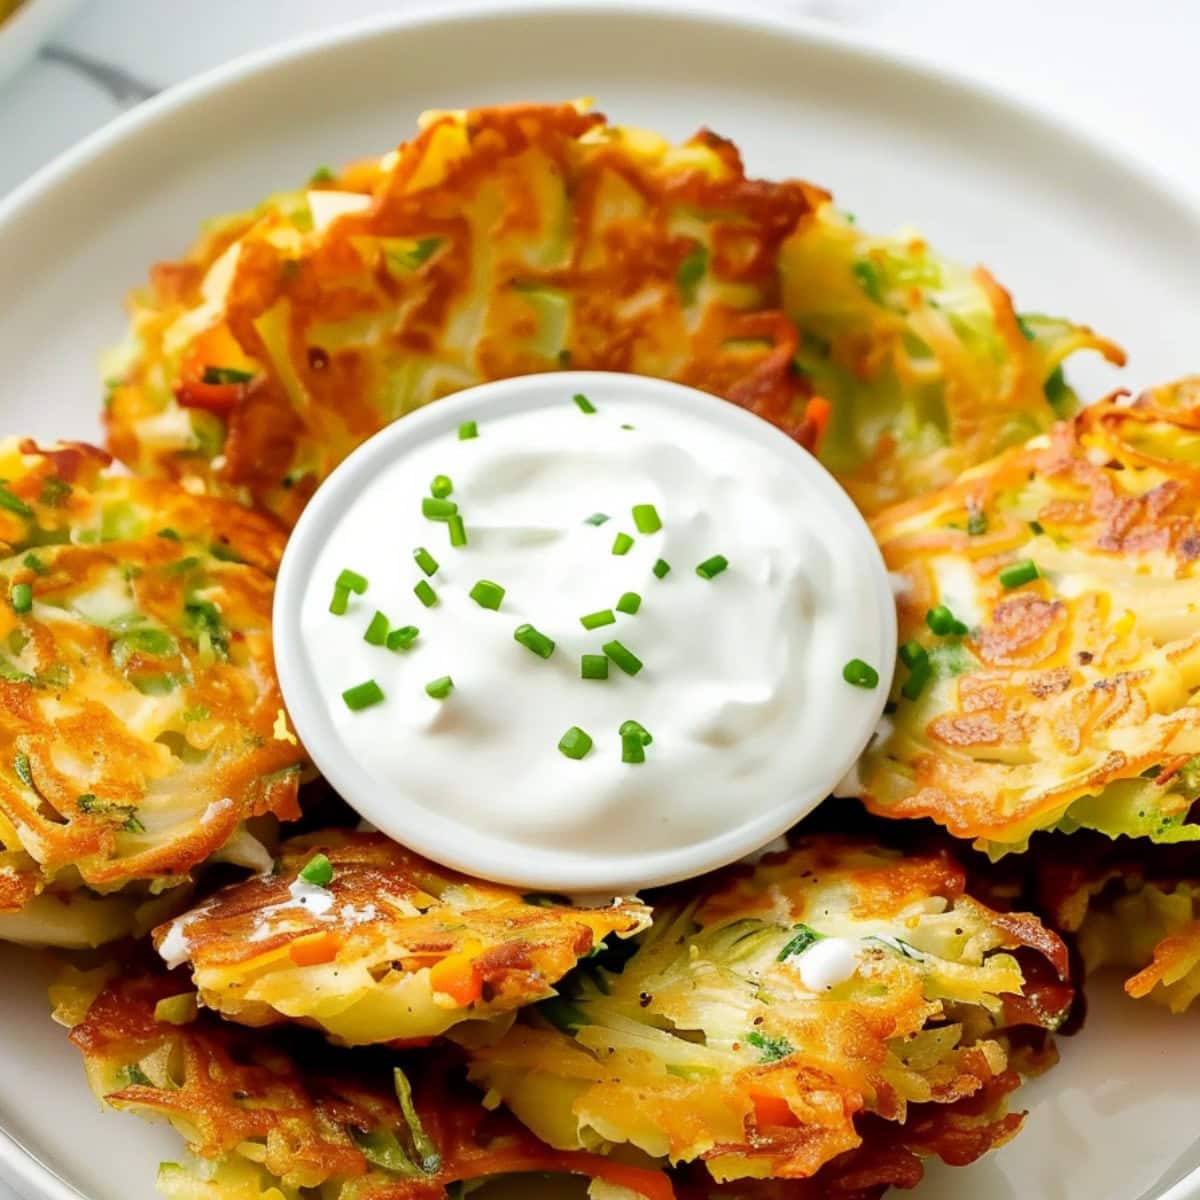 Delicious cabbage fritters with carrots and scallions, served hot and crispy with your favorite dipping sauce